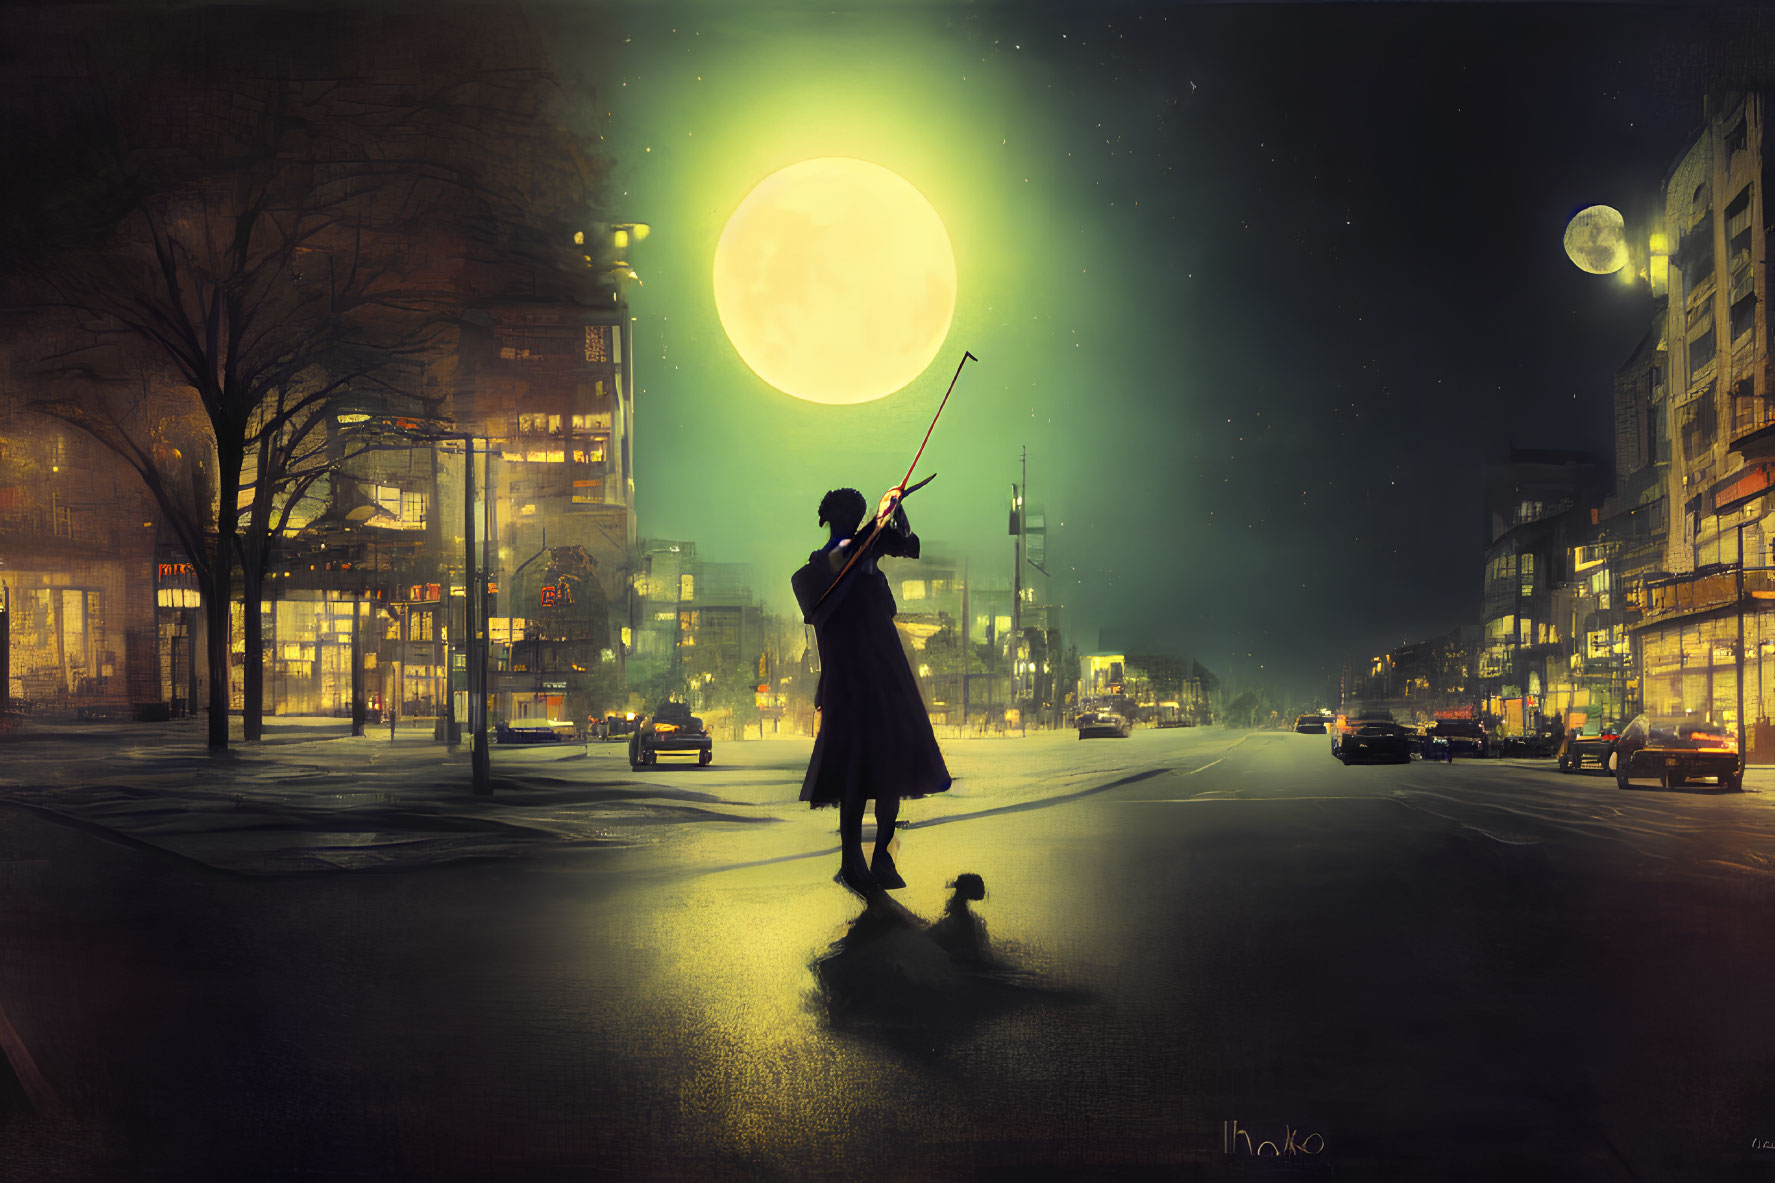 Person in Long Coat Pointing Stick at Luminous Moon in Night Cityscape